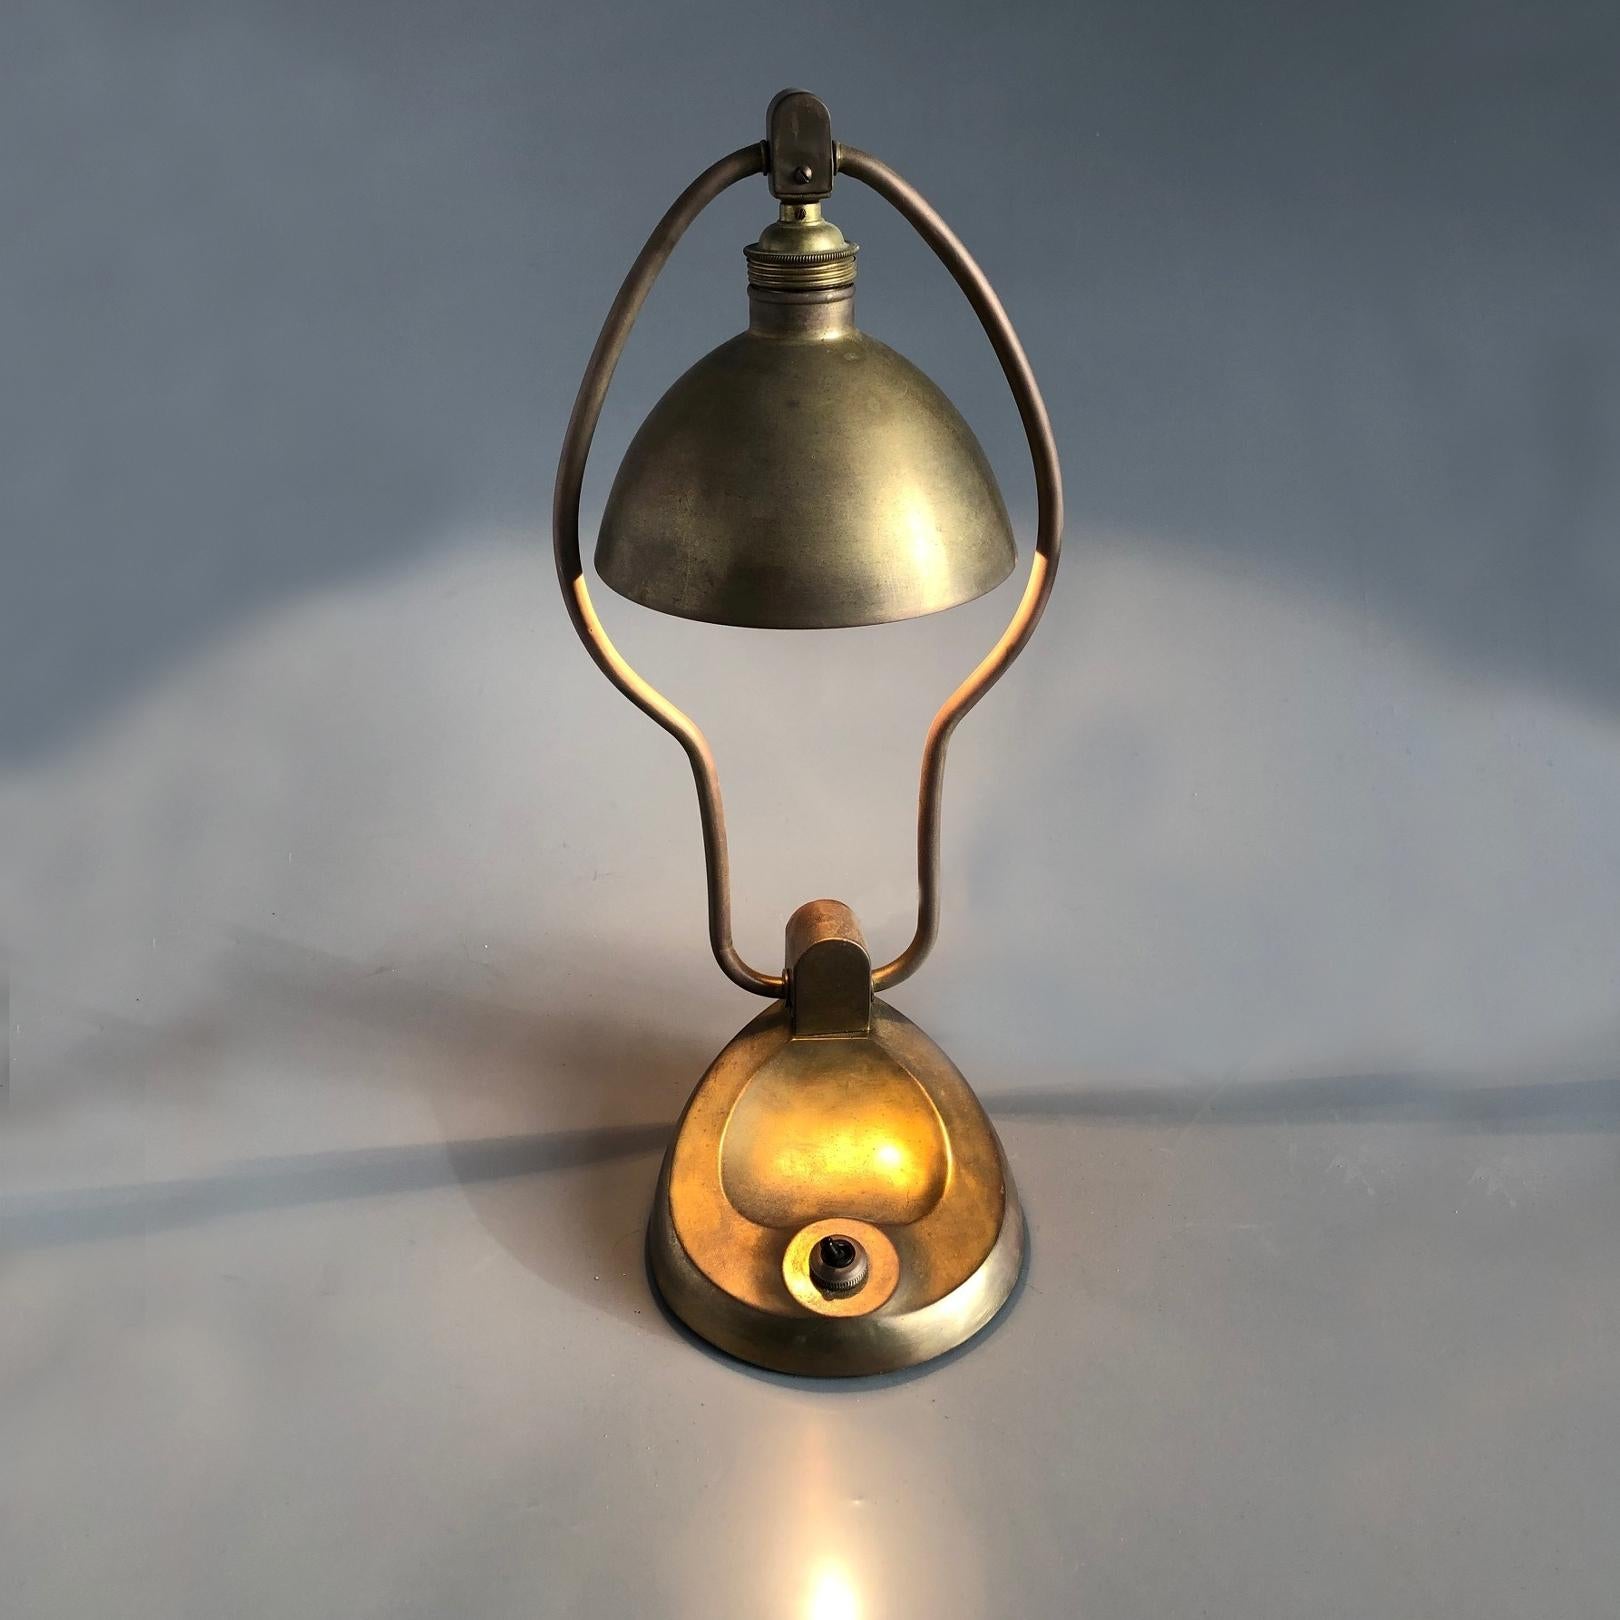 Table lamp made of cast brass base, bras shade support and spun brass shade. Adjustable reflecting brass shade, fitted with one E 27 socket and base integrated switch. Nice original condition, just cleaned and rewired.